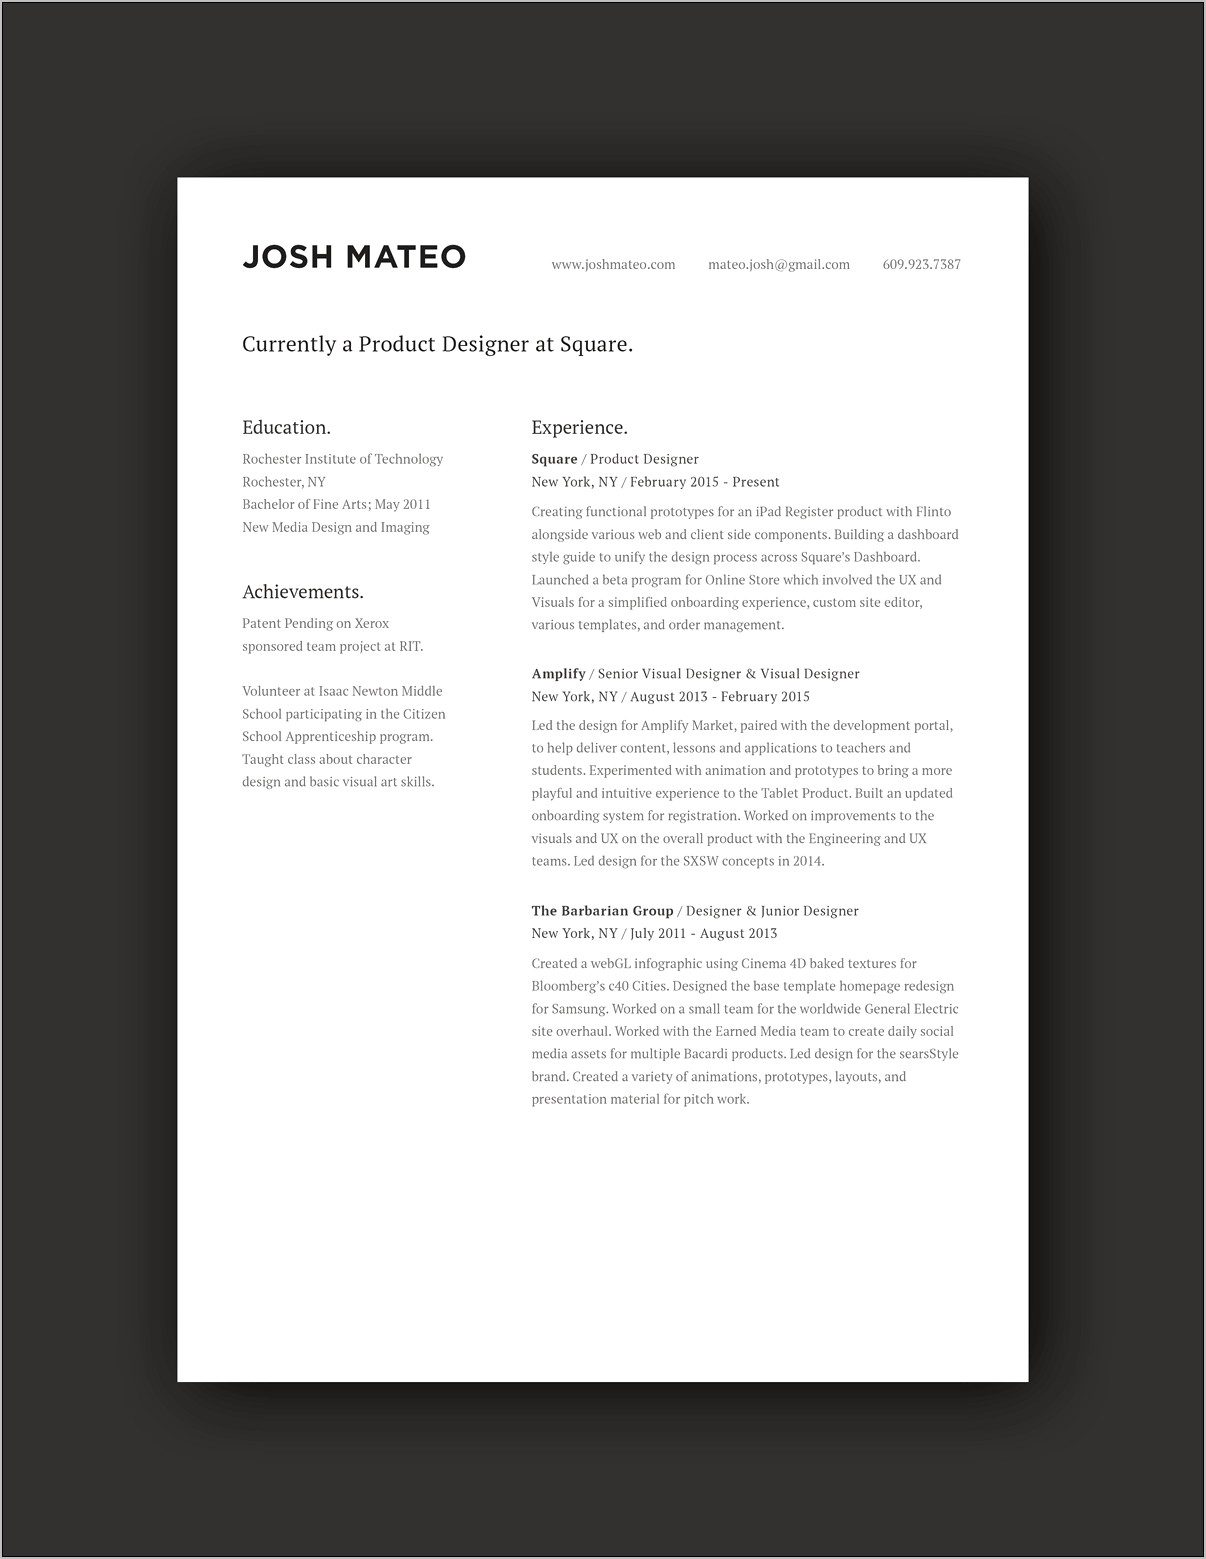 Personal Brand Statement Resume Examples